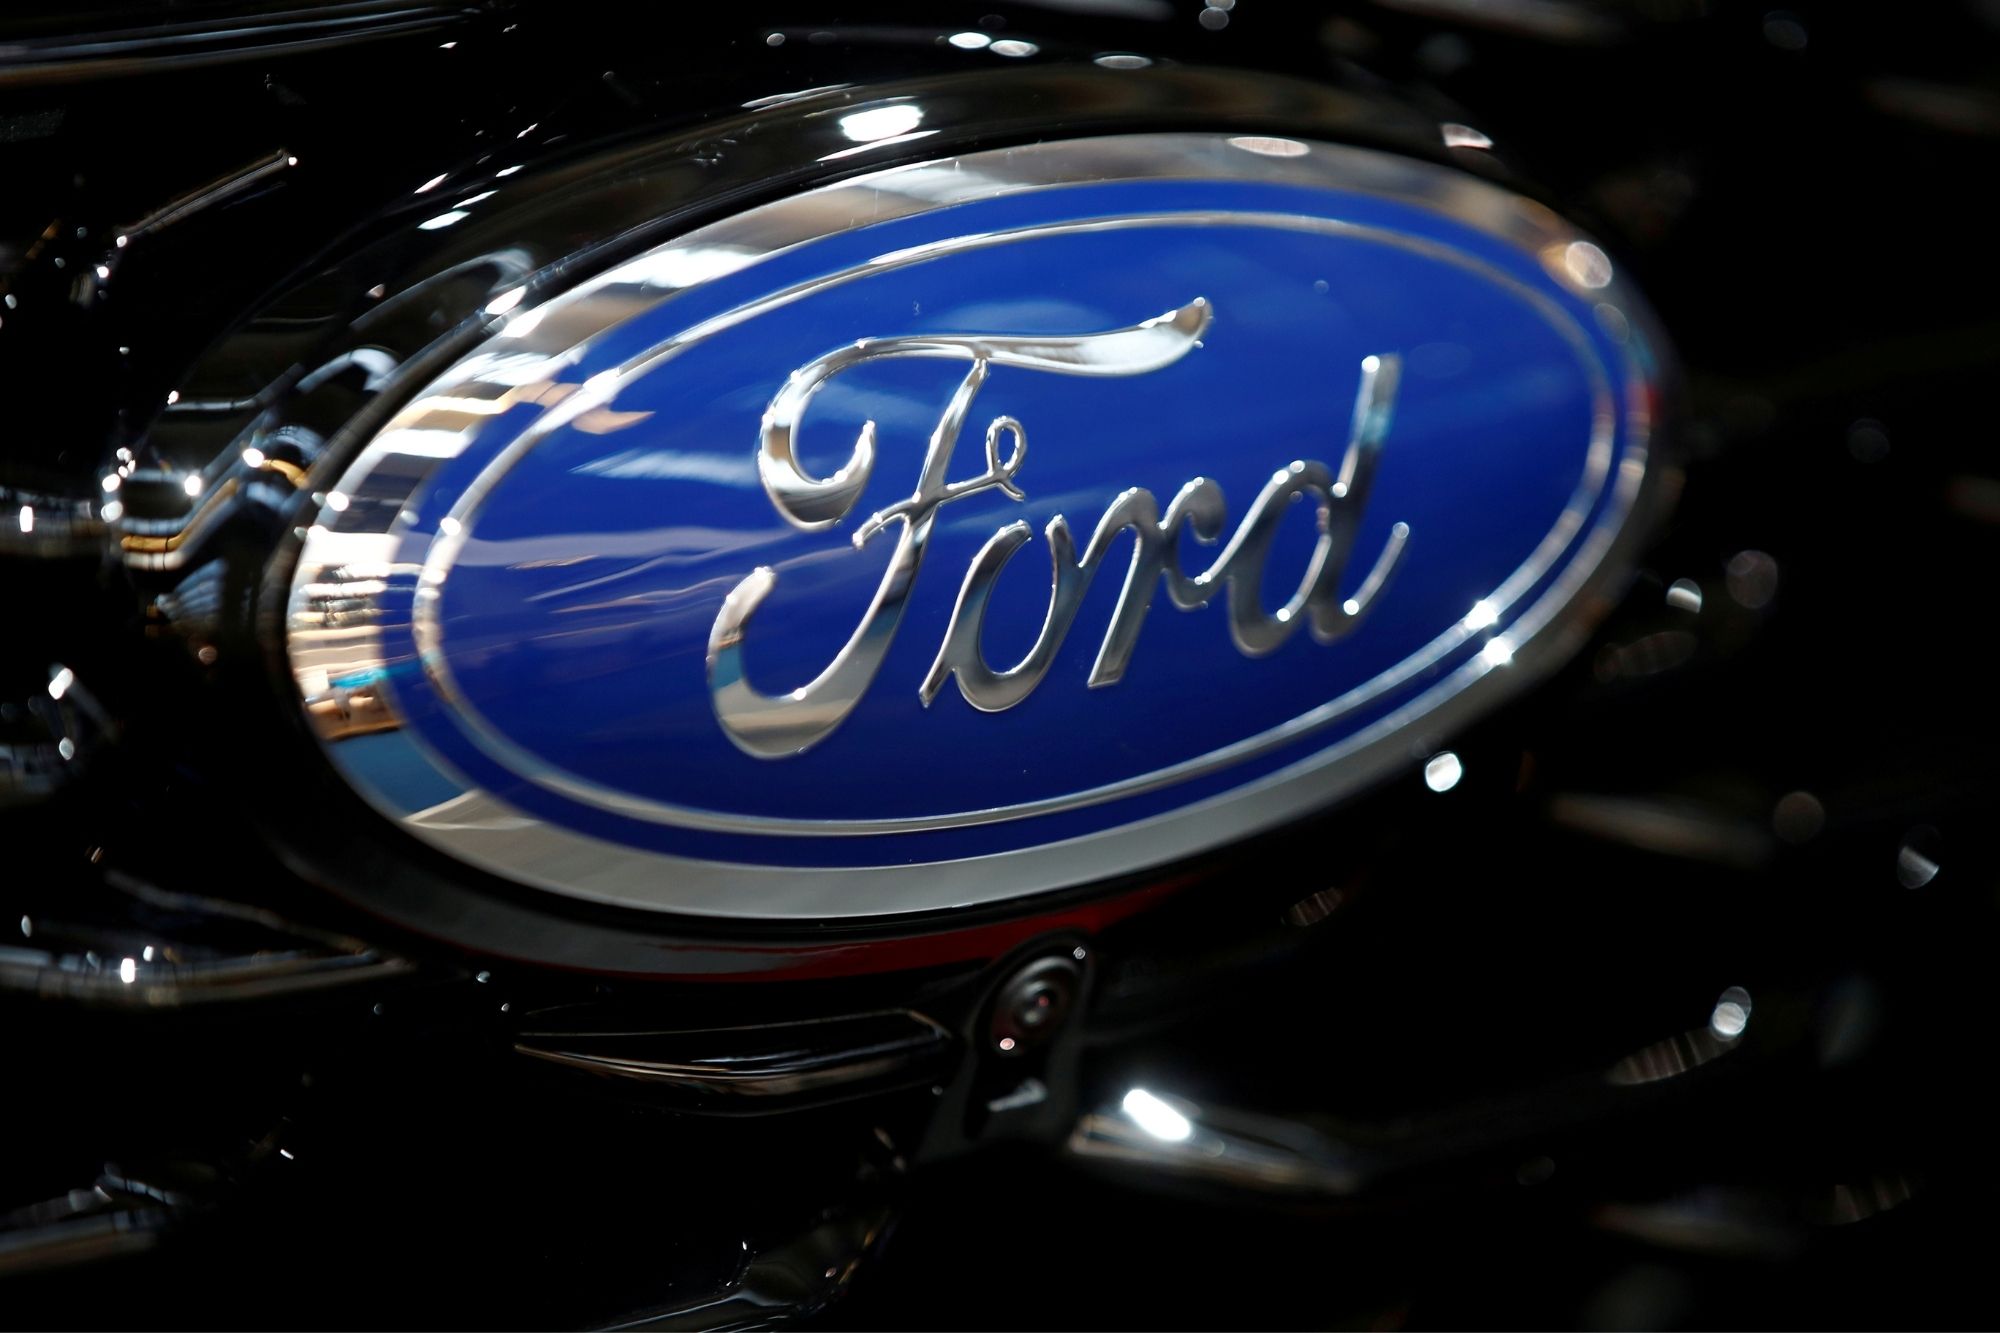 https://forbes.com.br/wp-content/uploads/2021/05/money-ford-20mai21-wolfgang-rattay-reuters.jpg